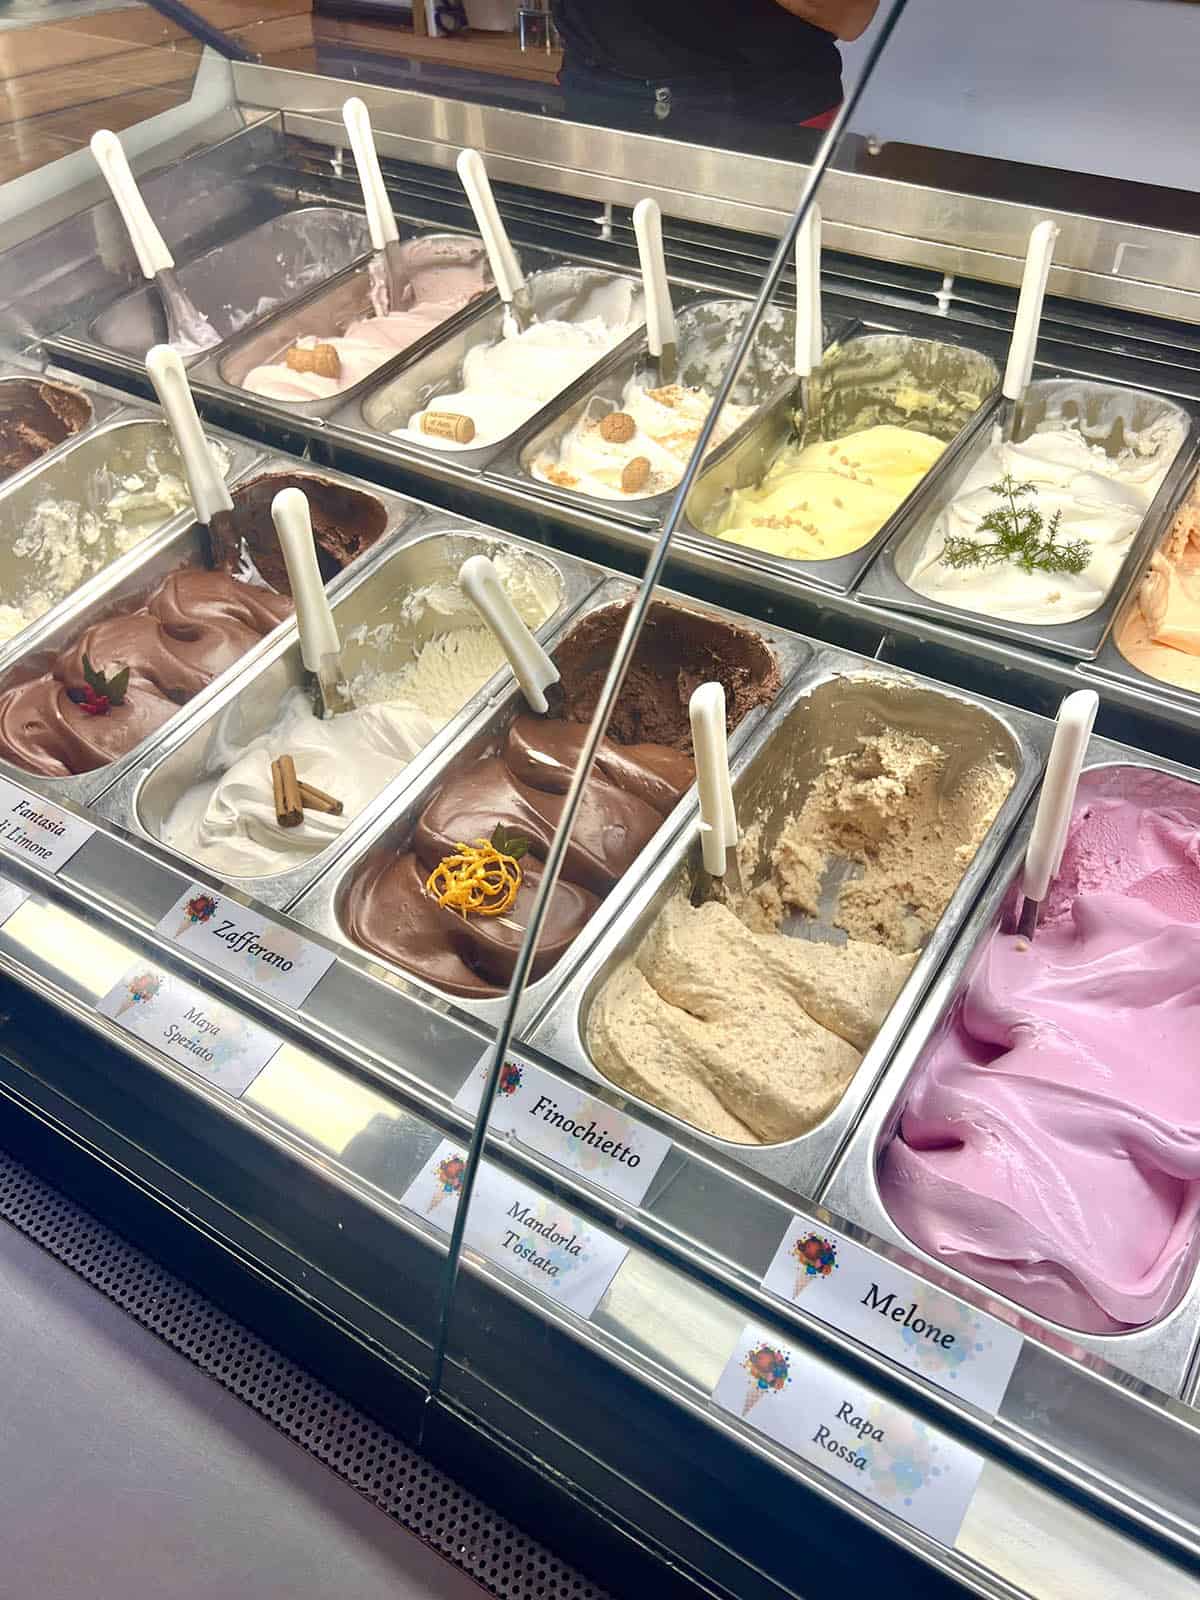 A selection of gelato flavours in the display fridge at Gelato DiVini in Ragusa, Sicily